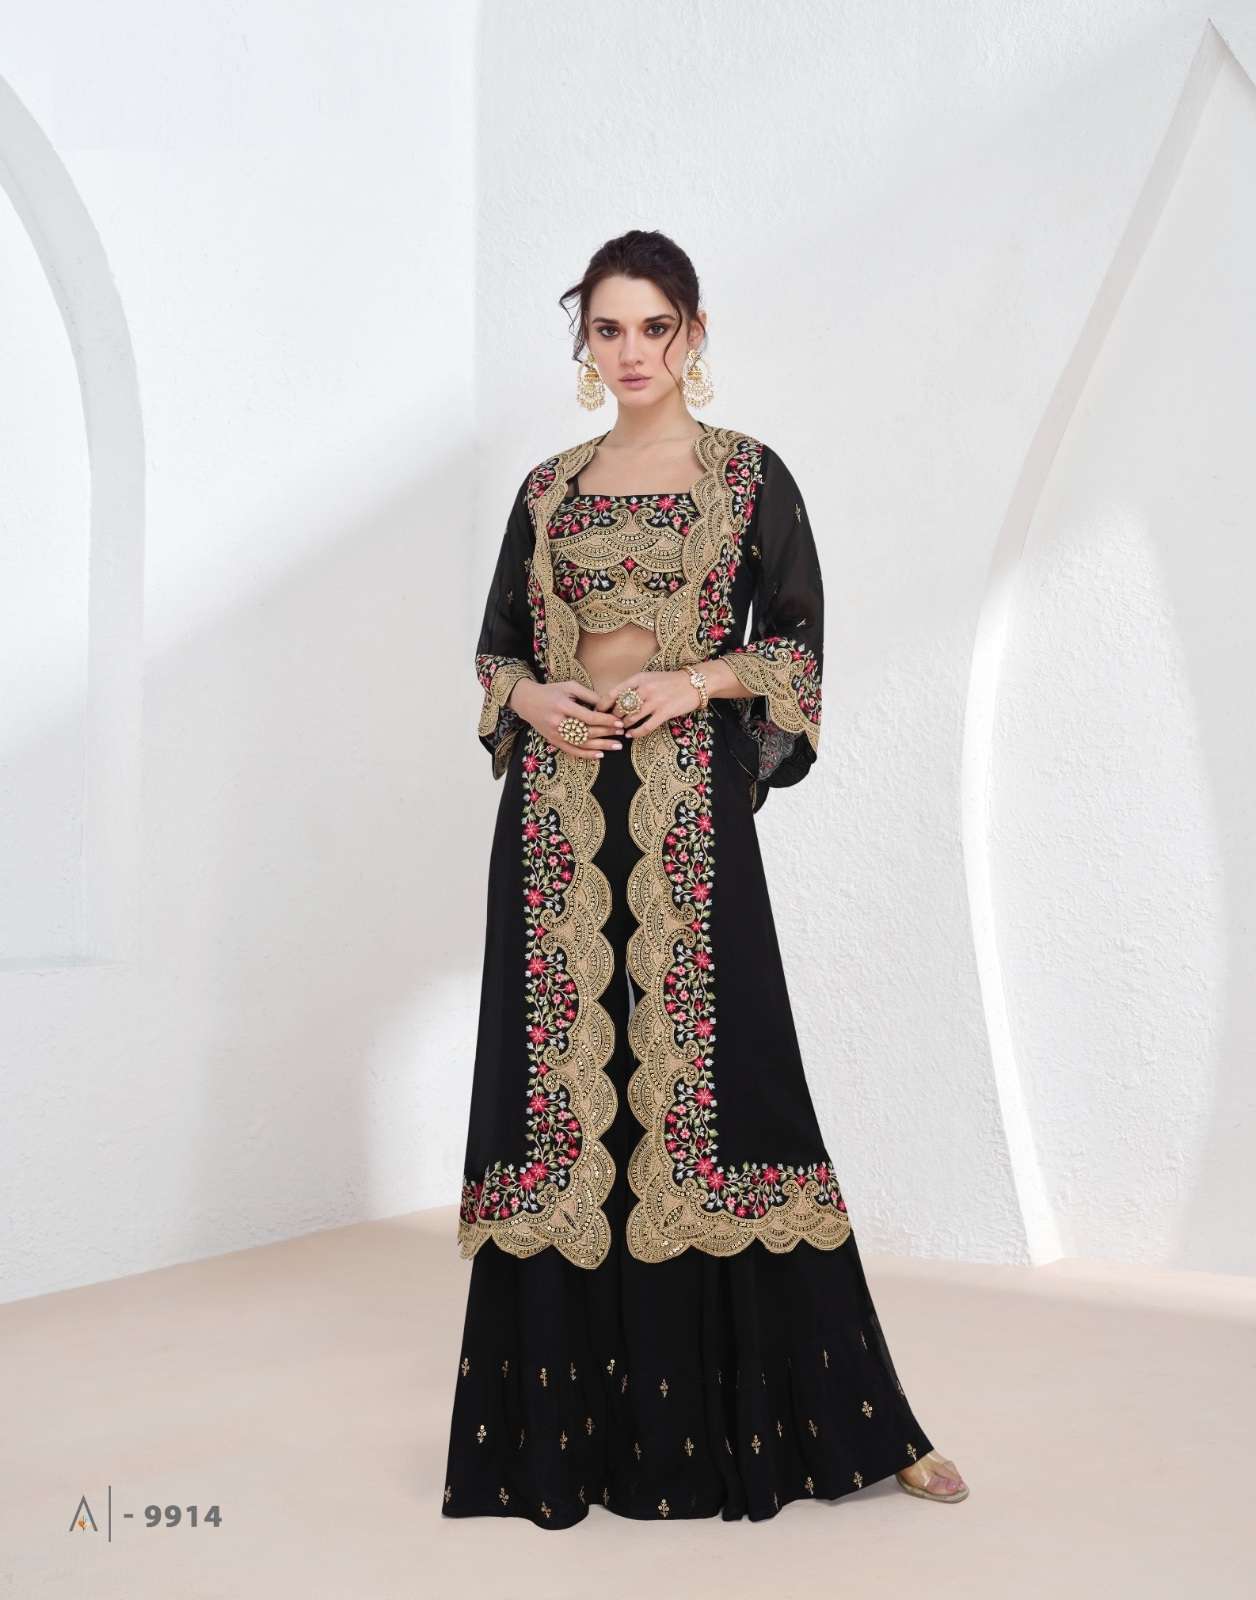 INDIAN BOLLYWOOD DESIGNER PARTY WEAR GEORGETTE BLACK KOTI SKIRT SALWAR SUIT CUM LEHENGA WITH THREAD SEQUENCE WORK SY AARZOO 9914